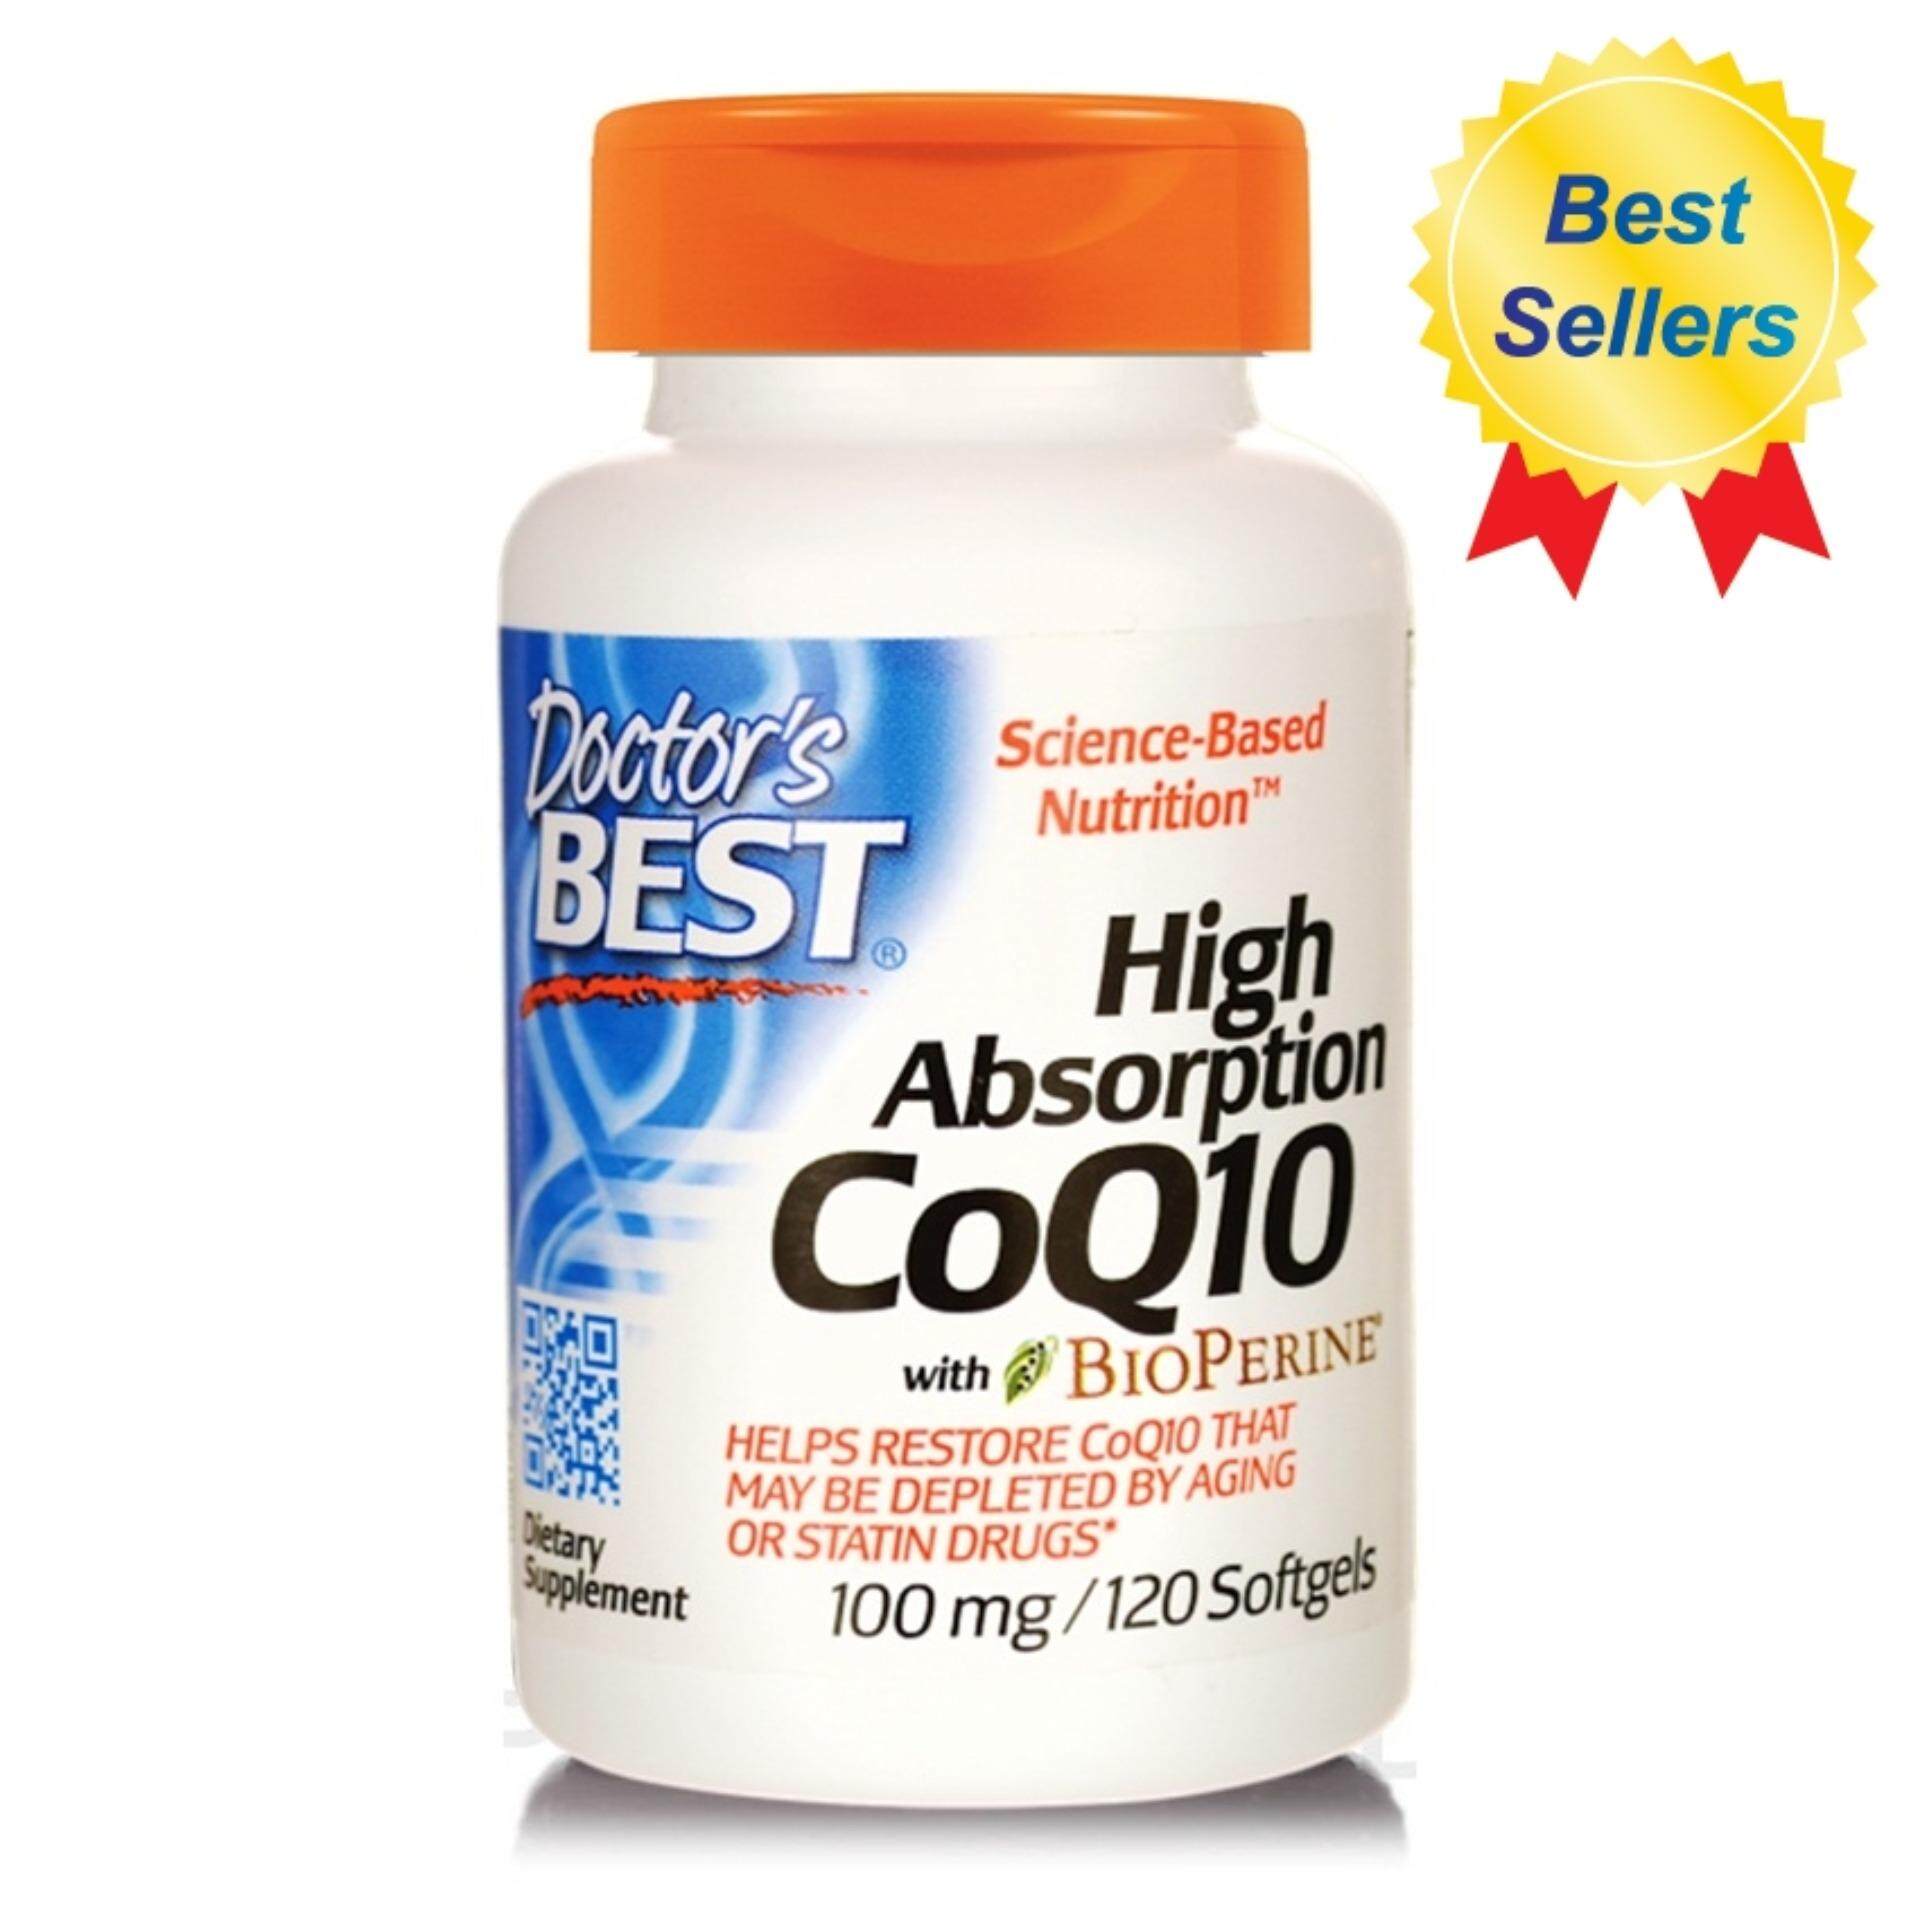 Doctor's Best, High Absorption CoQ10 with BioPerine, 100 mg, 120 Softgels